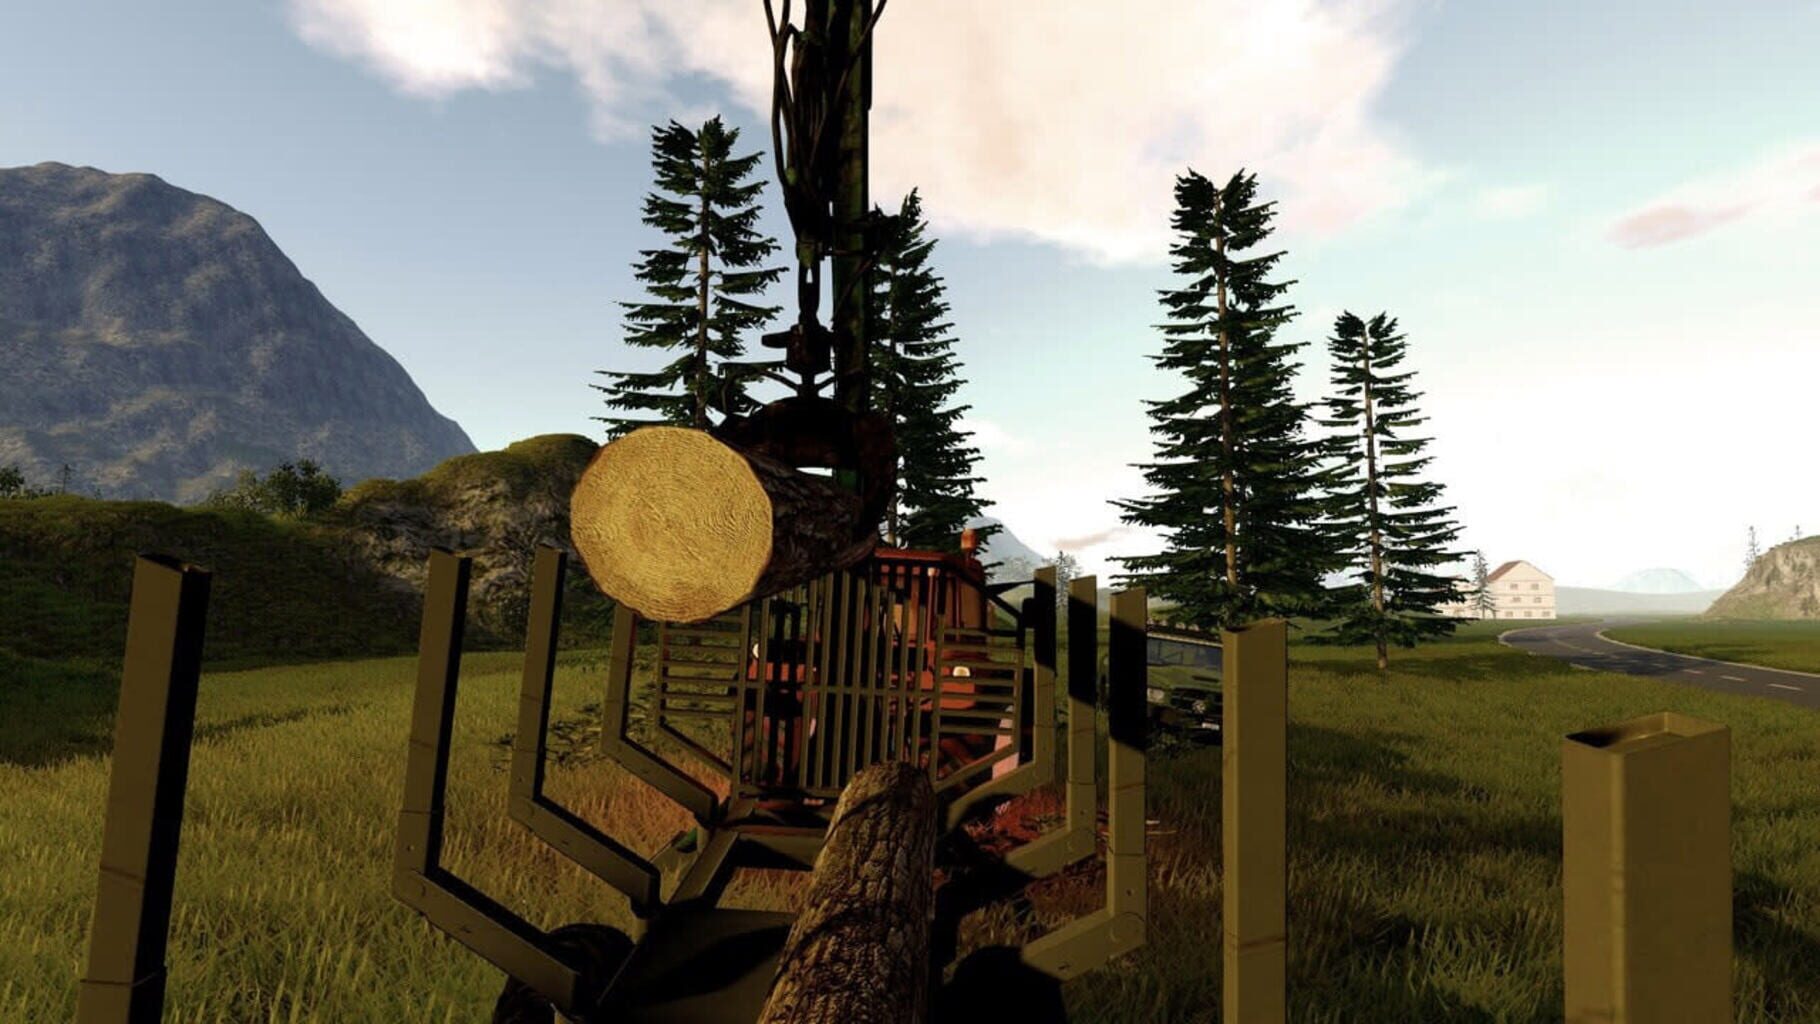 Forestry: The Simulation screenshot